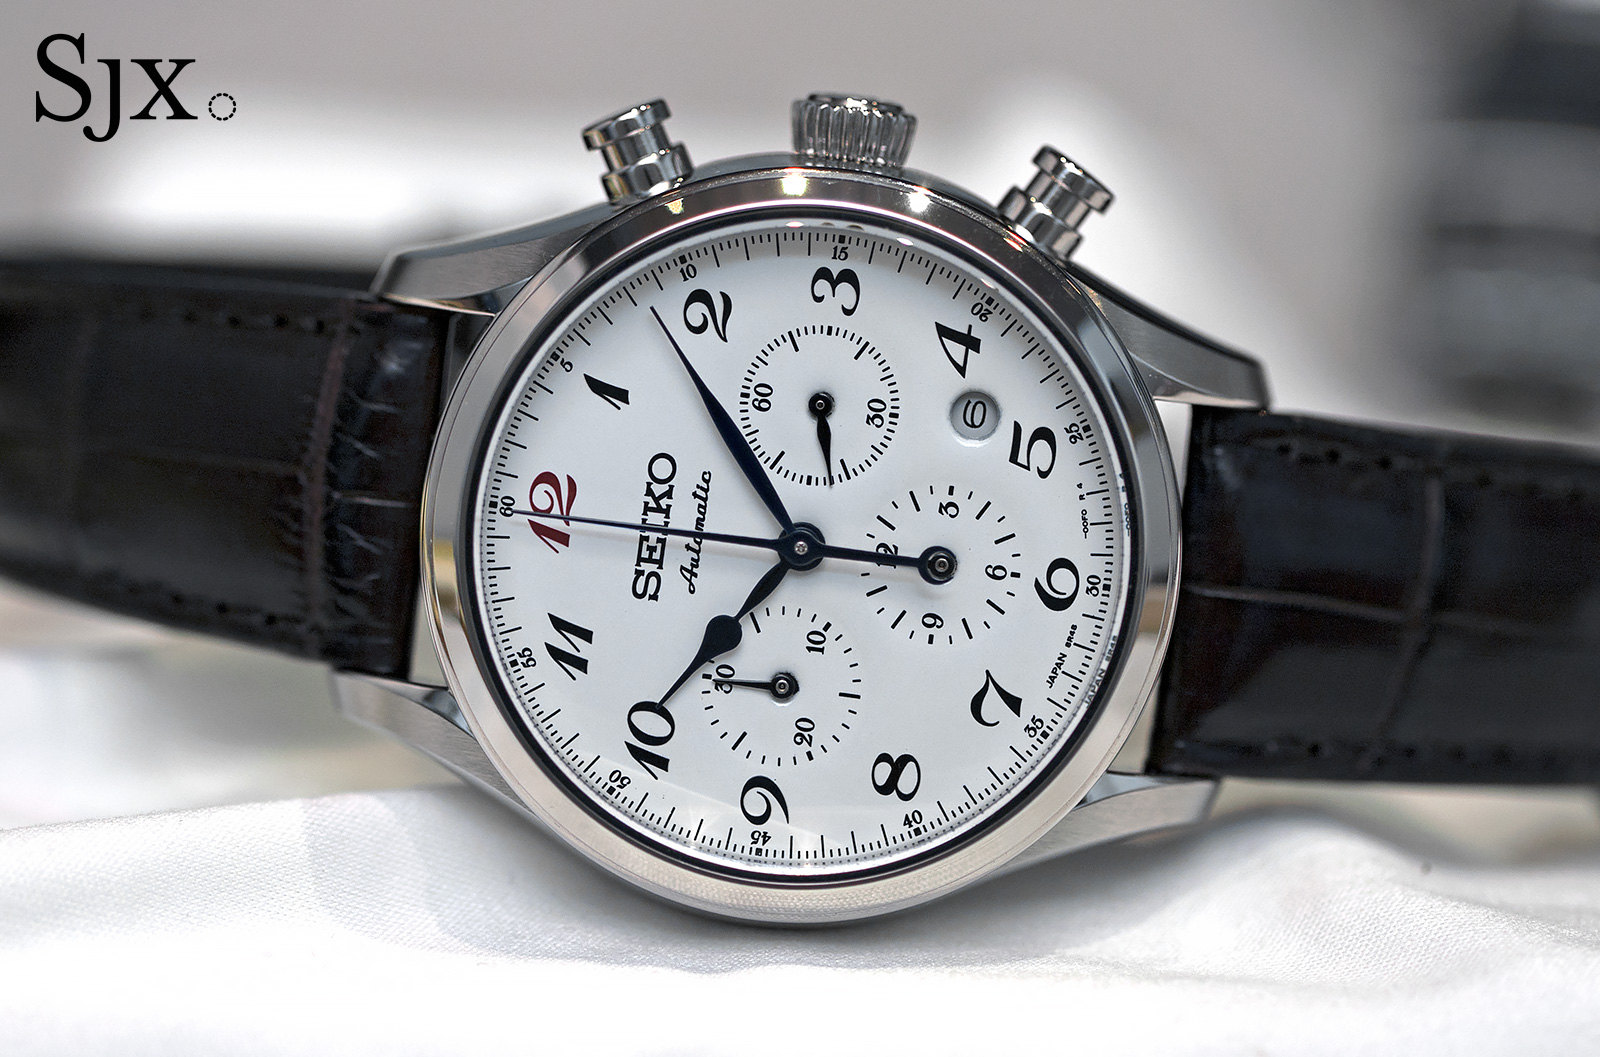 Hands-On with the Seiko Presage 60th Anniversary Chronographs in Enamel and  Urushi Lacquer | SJX Watches